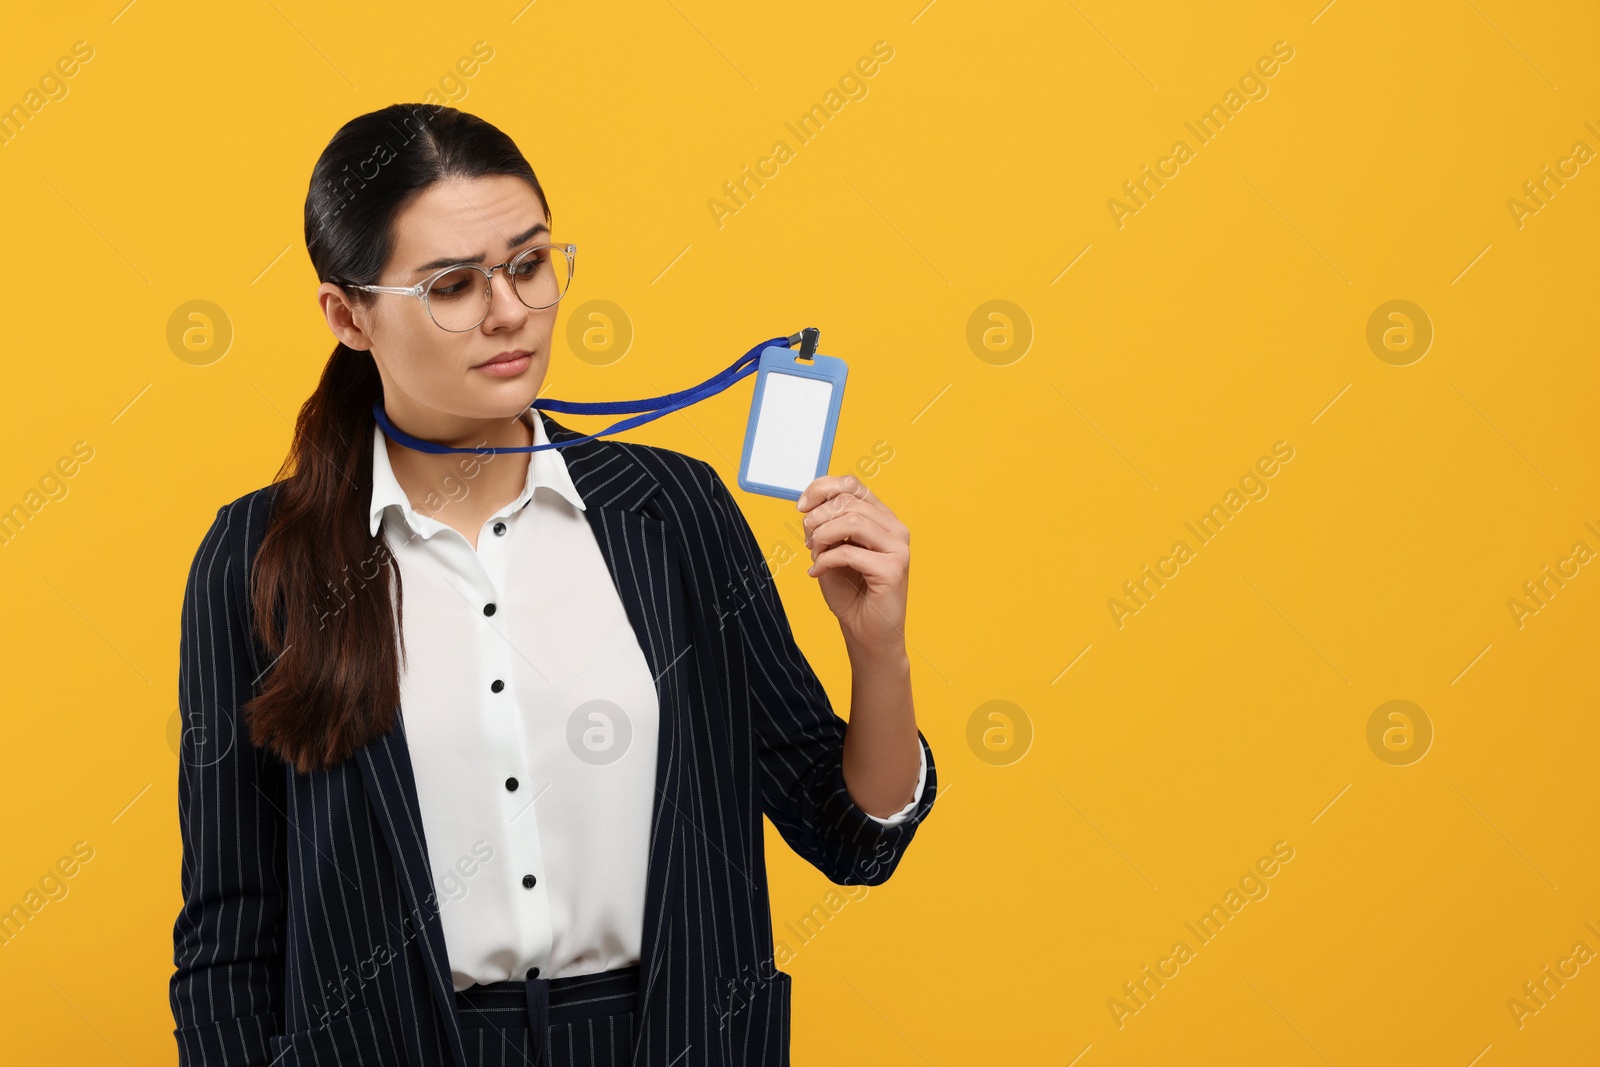 Photo of Woman with vip pass badge on orange background. Space for text